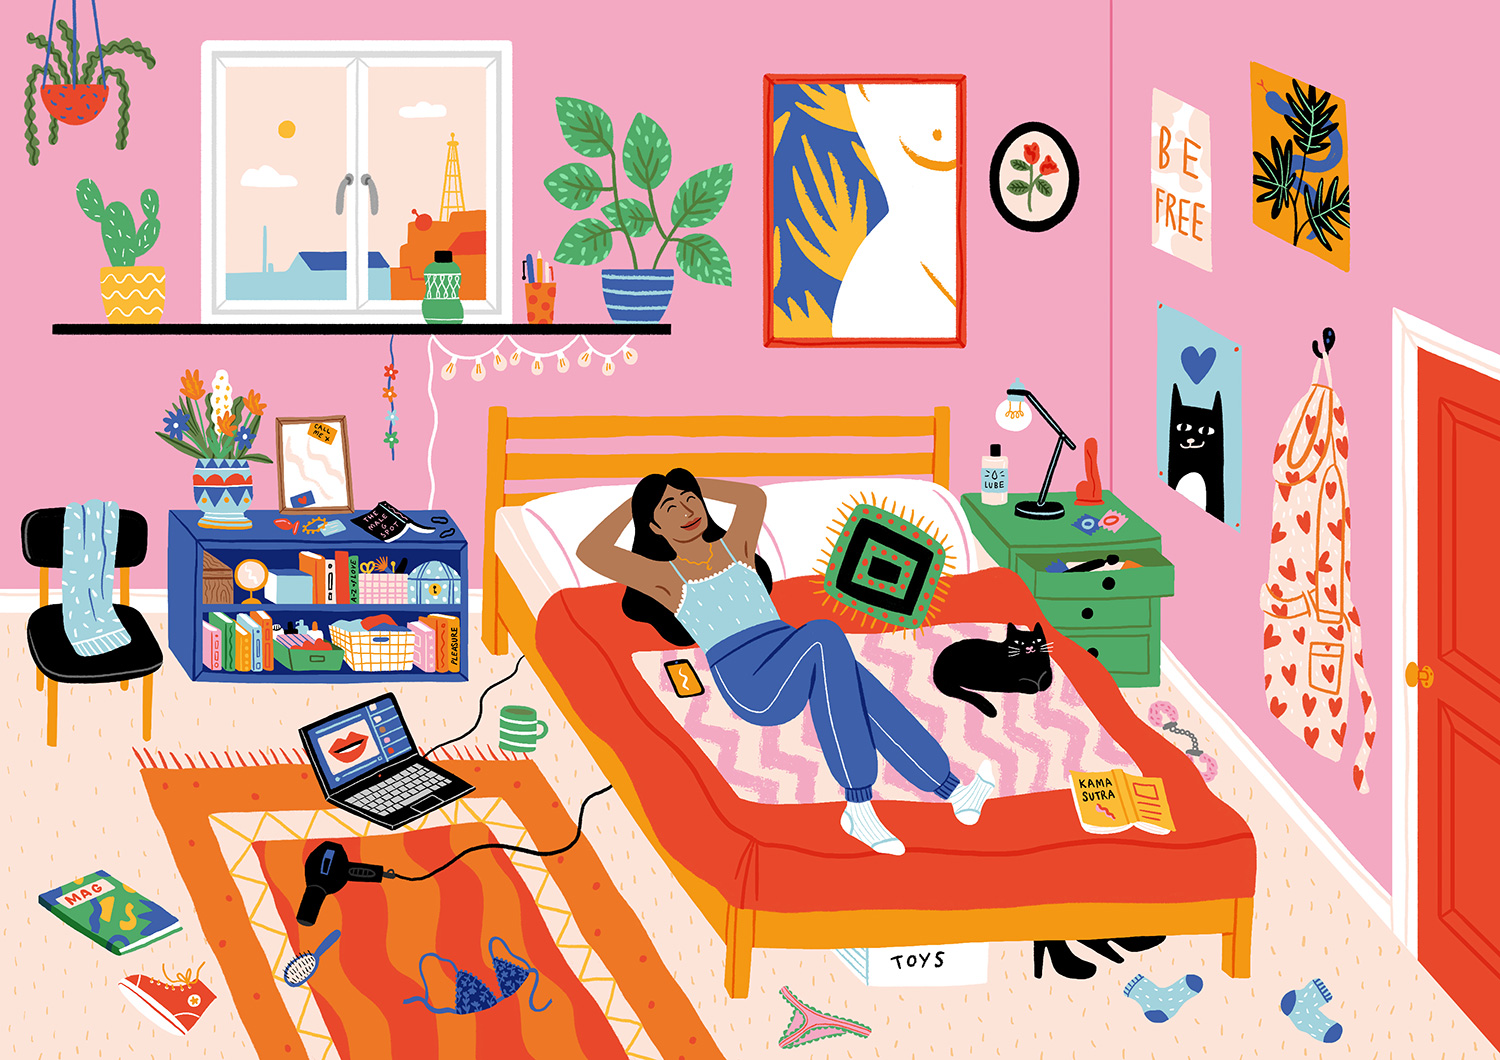 An illustration of a young person's very messy and colourful bedroom.